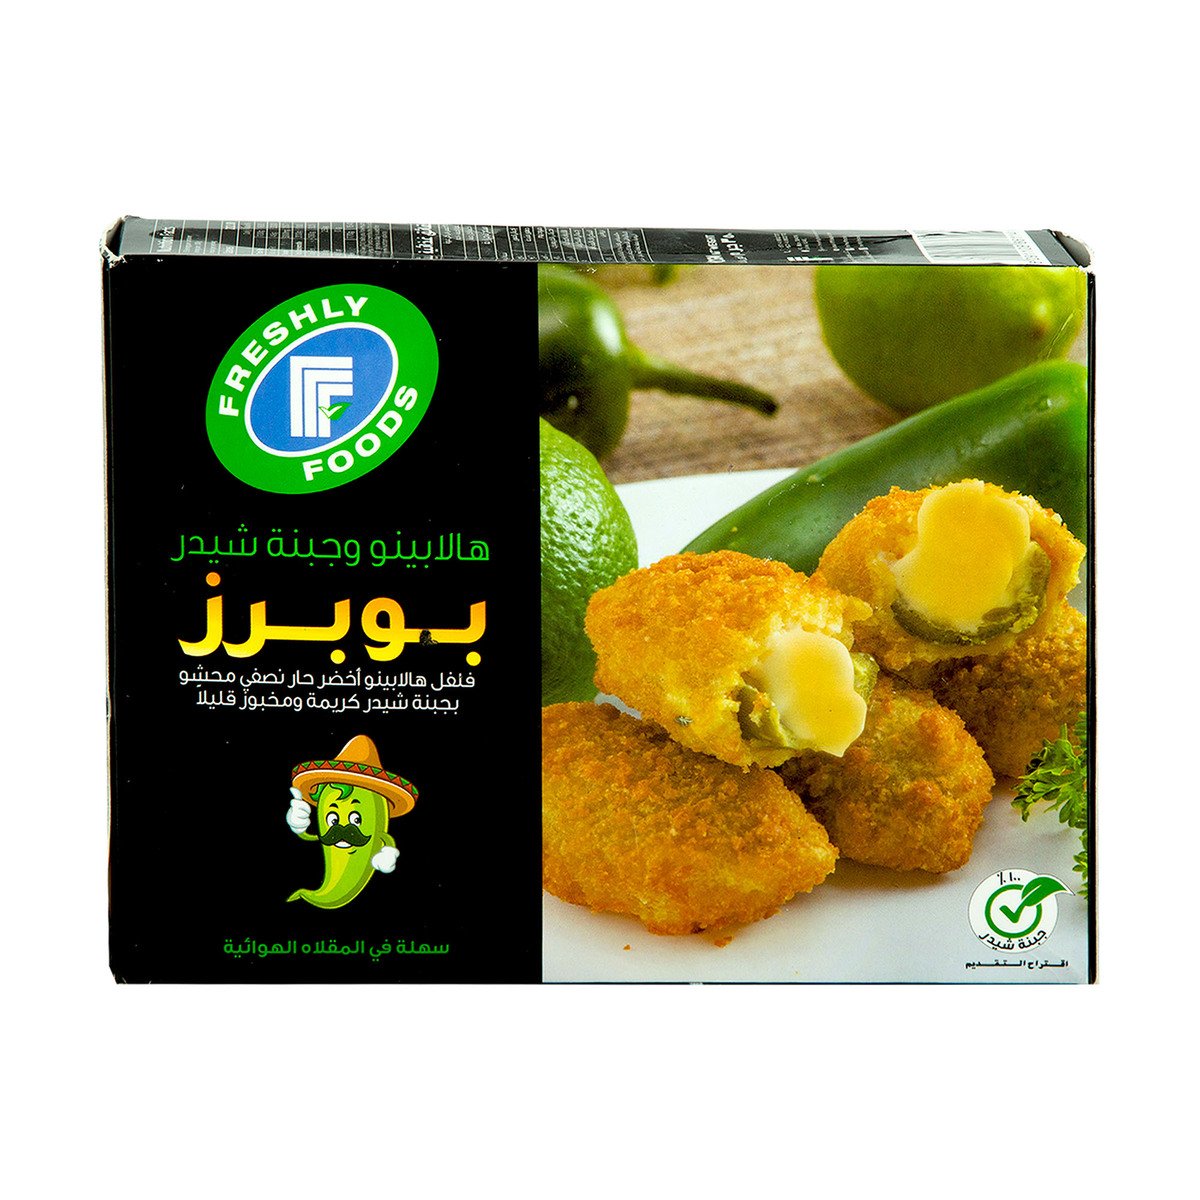 Freshly Foods Jalapeno & Cheddar Cheese Poppers 350 g